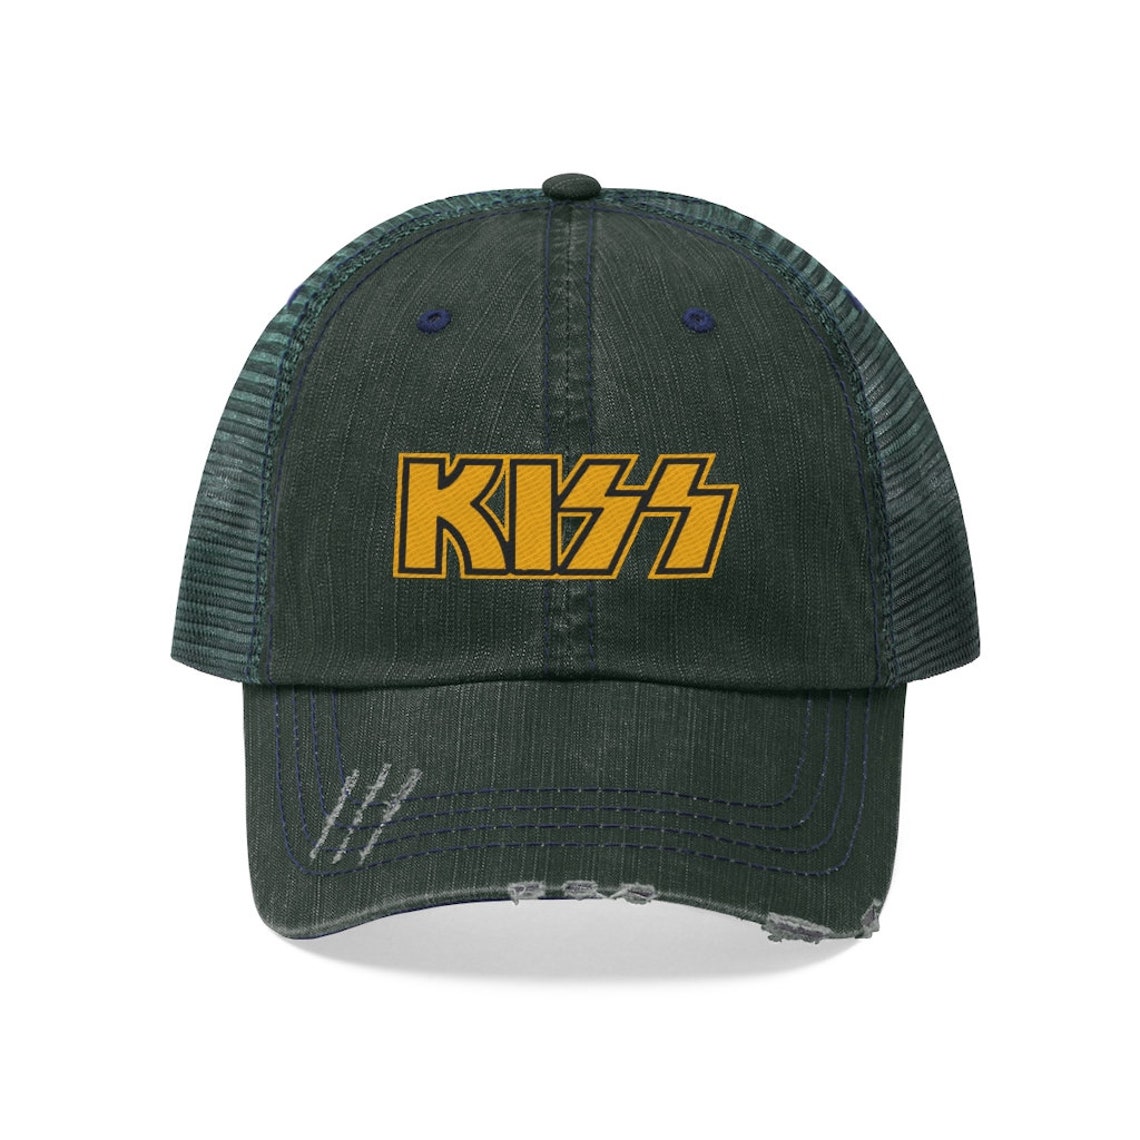 KISS Band hat music Vintage Embroidery hat Unisex Trucker Hat | Etsy